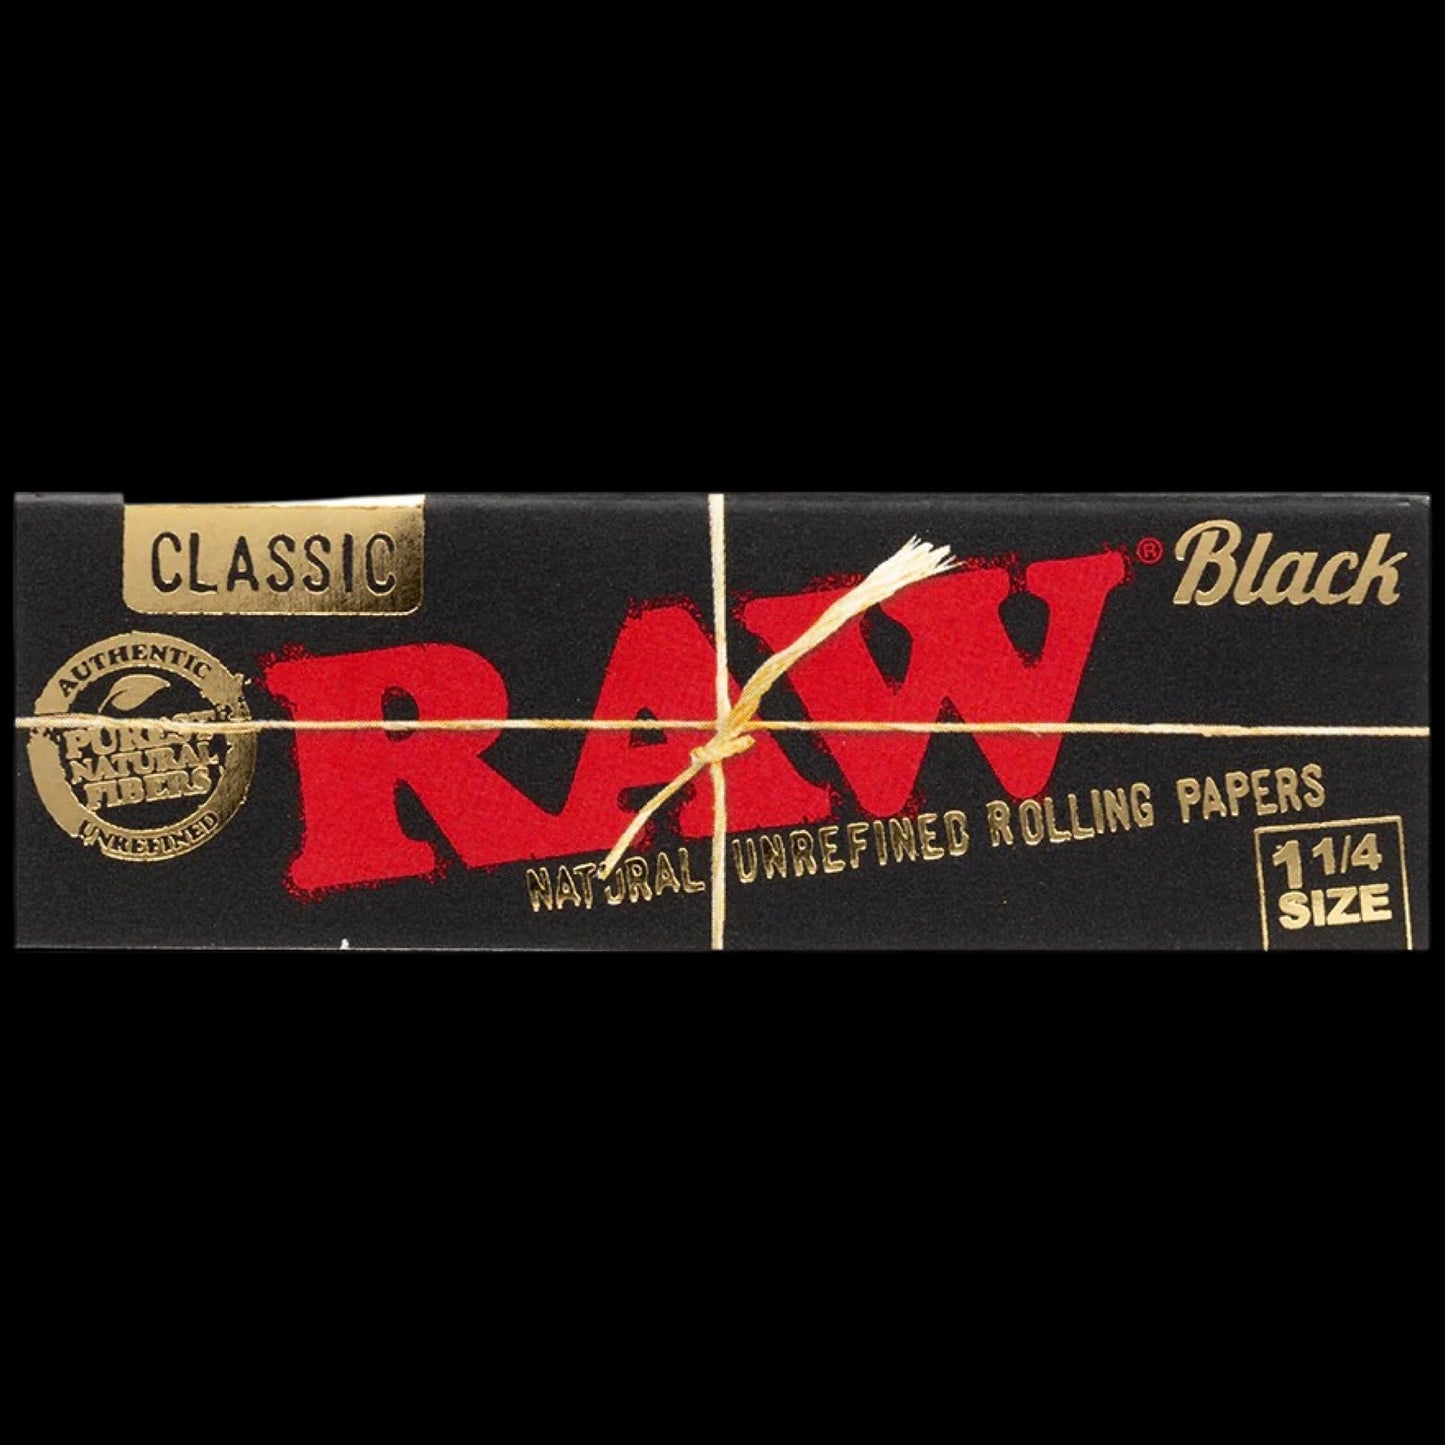 Raw rolling papers black